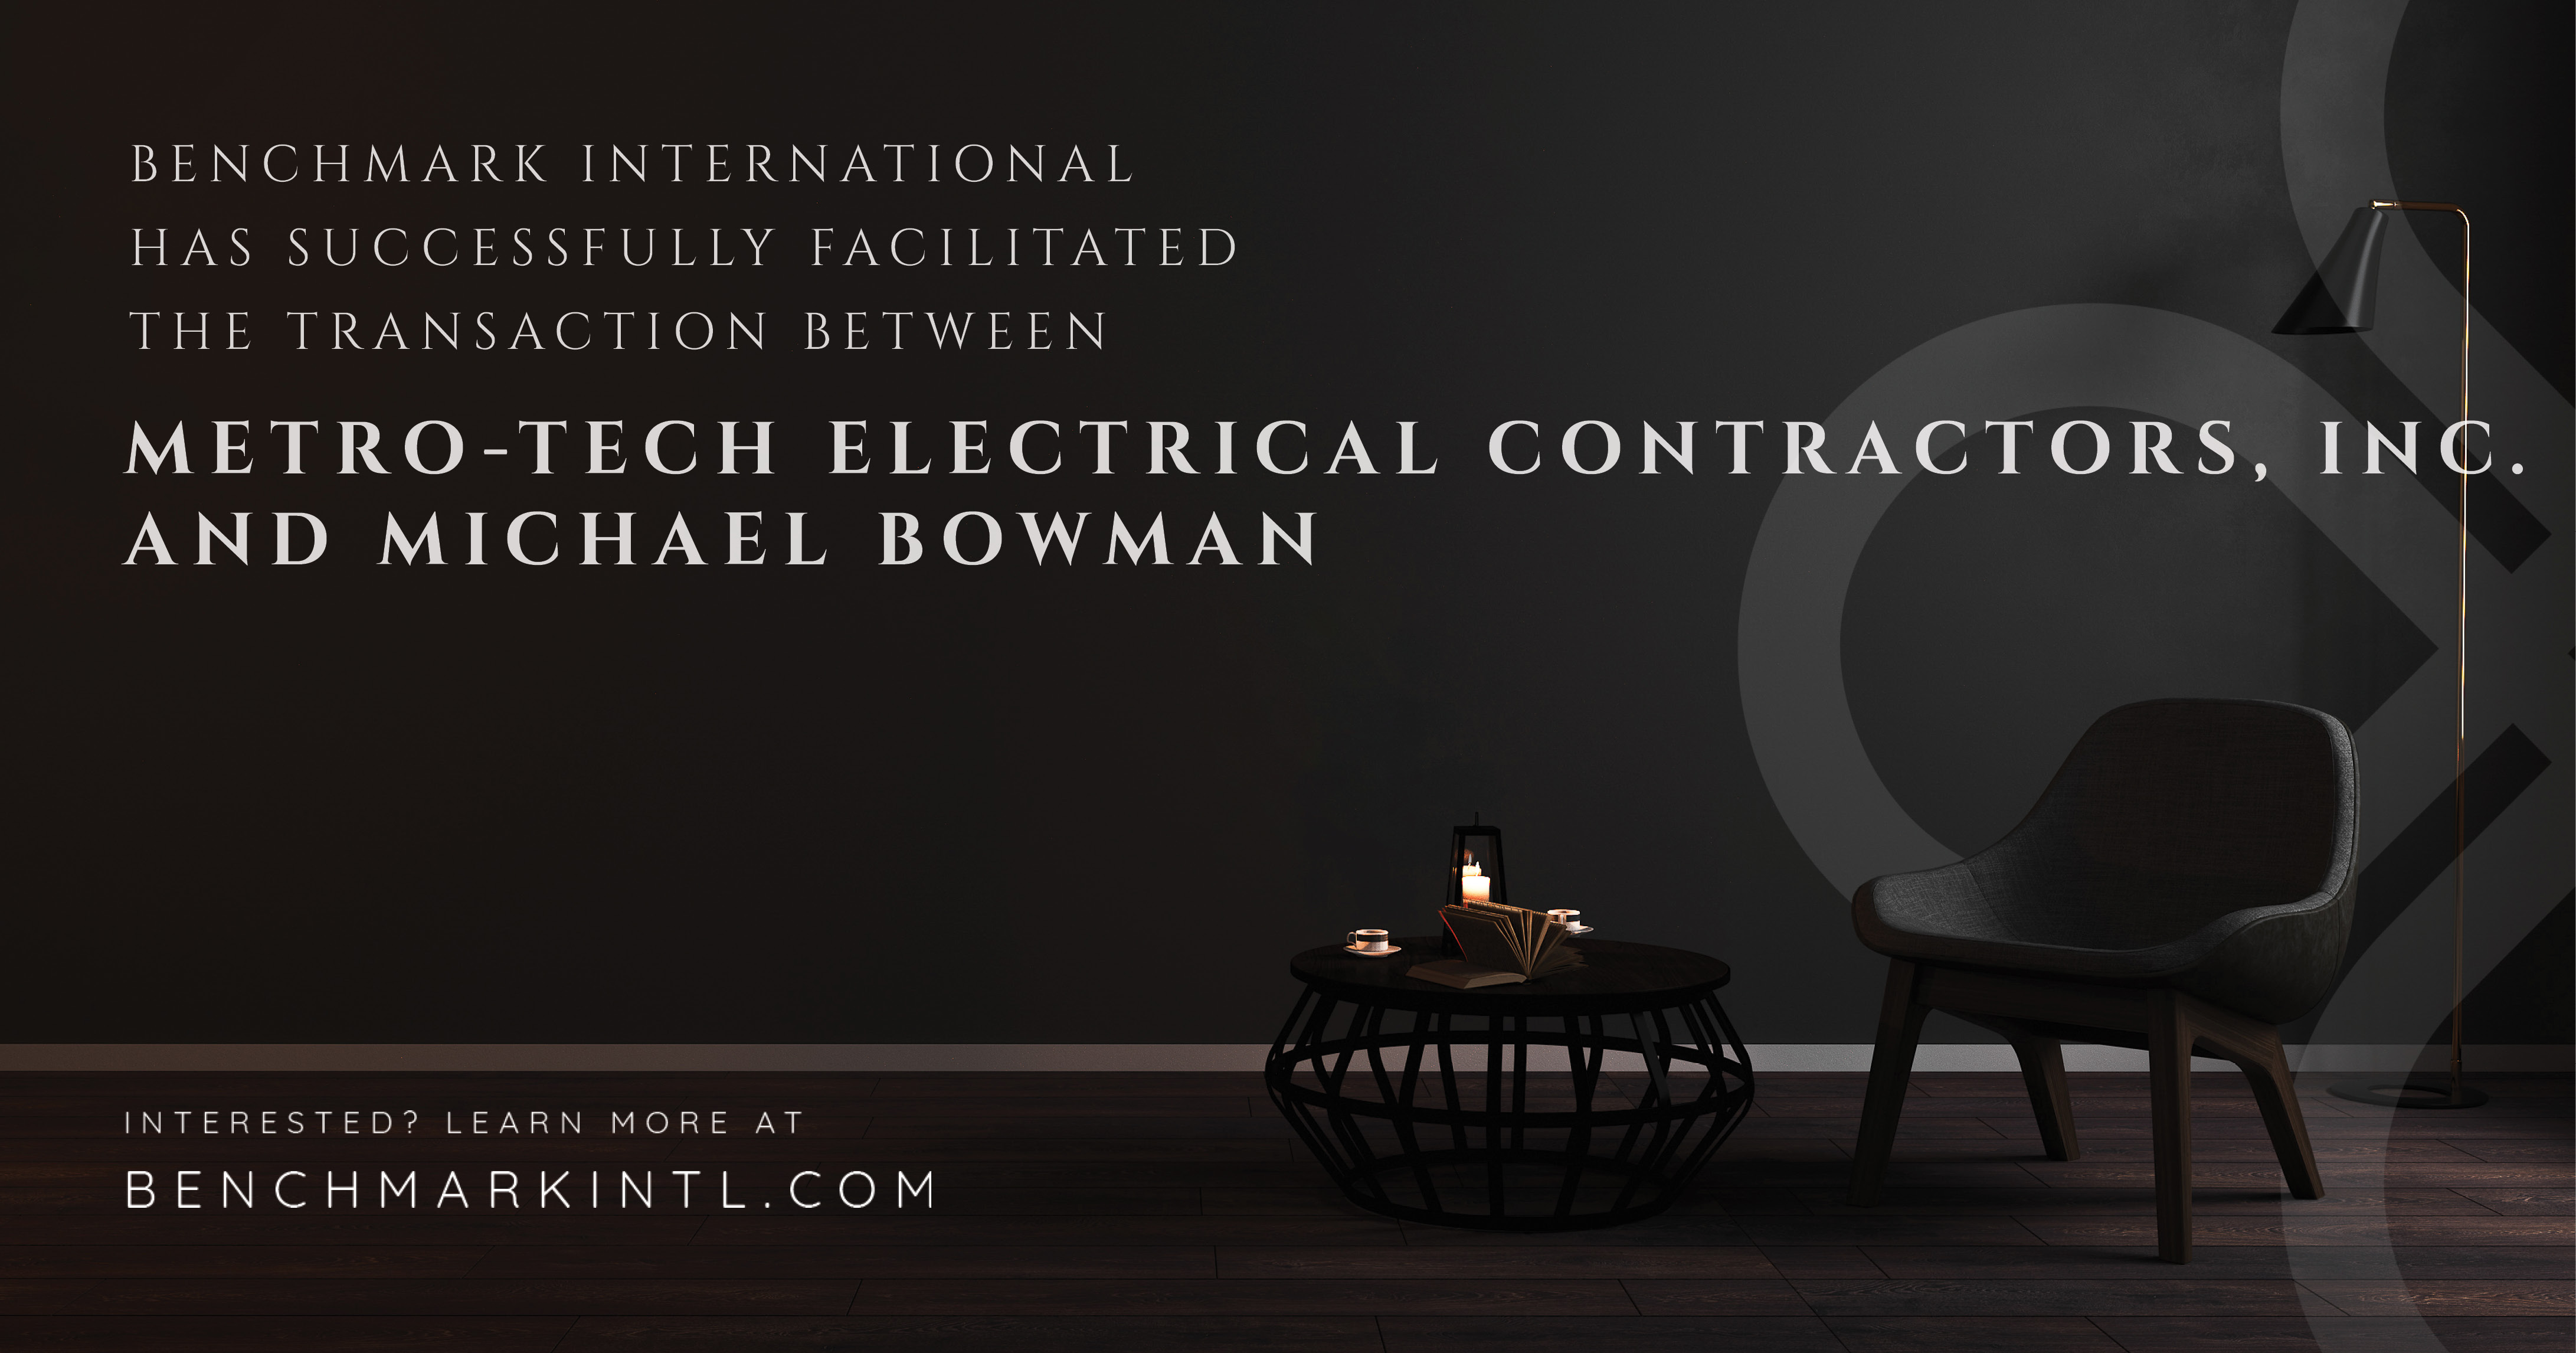 Benchmark International Facilitated The Transaction Of Metro-tech Electrical Contractors, Inc. To Michael Bowman